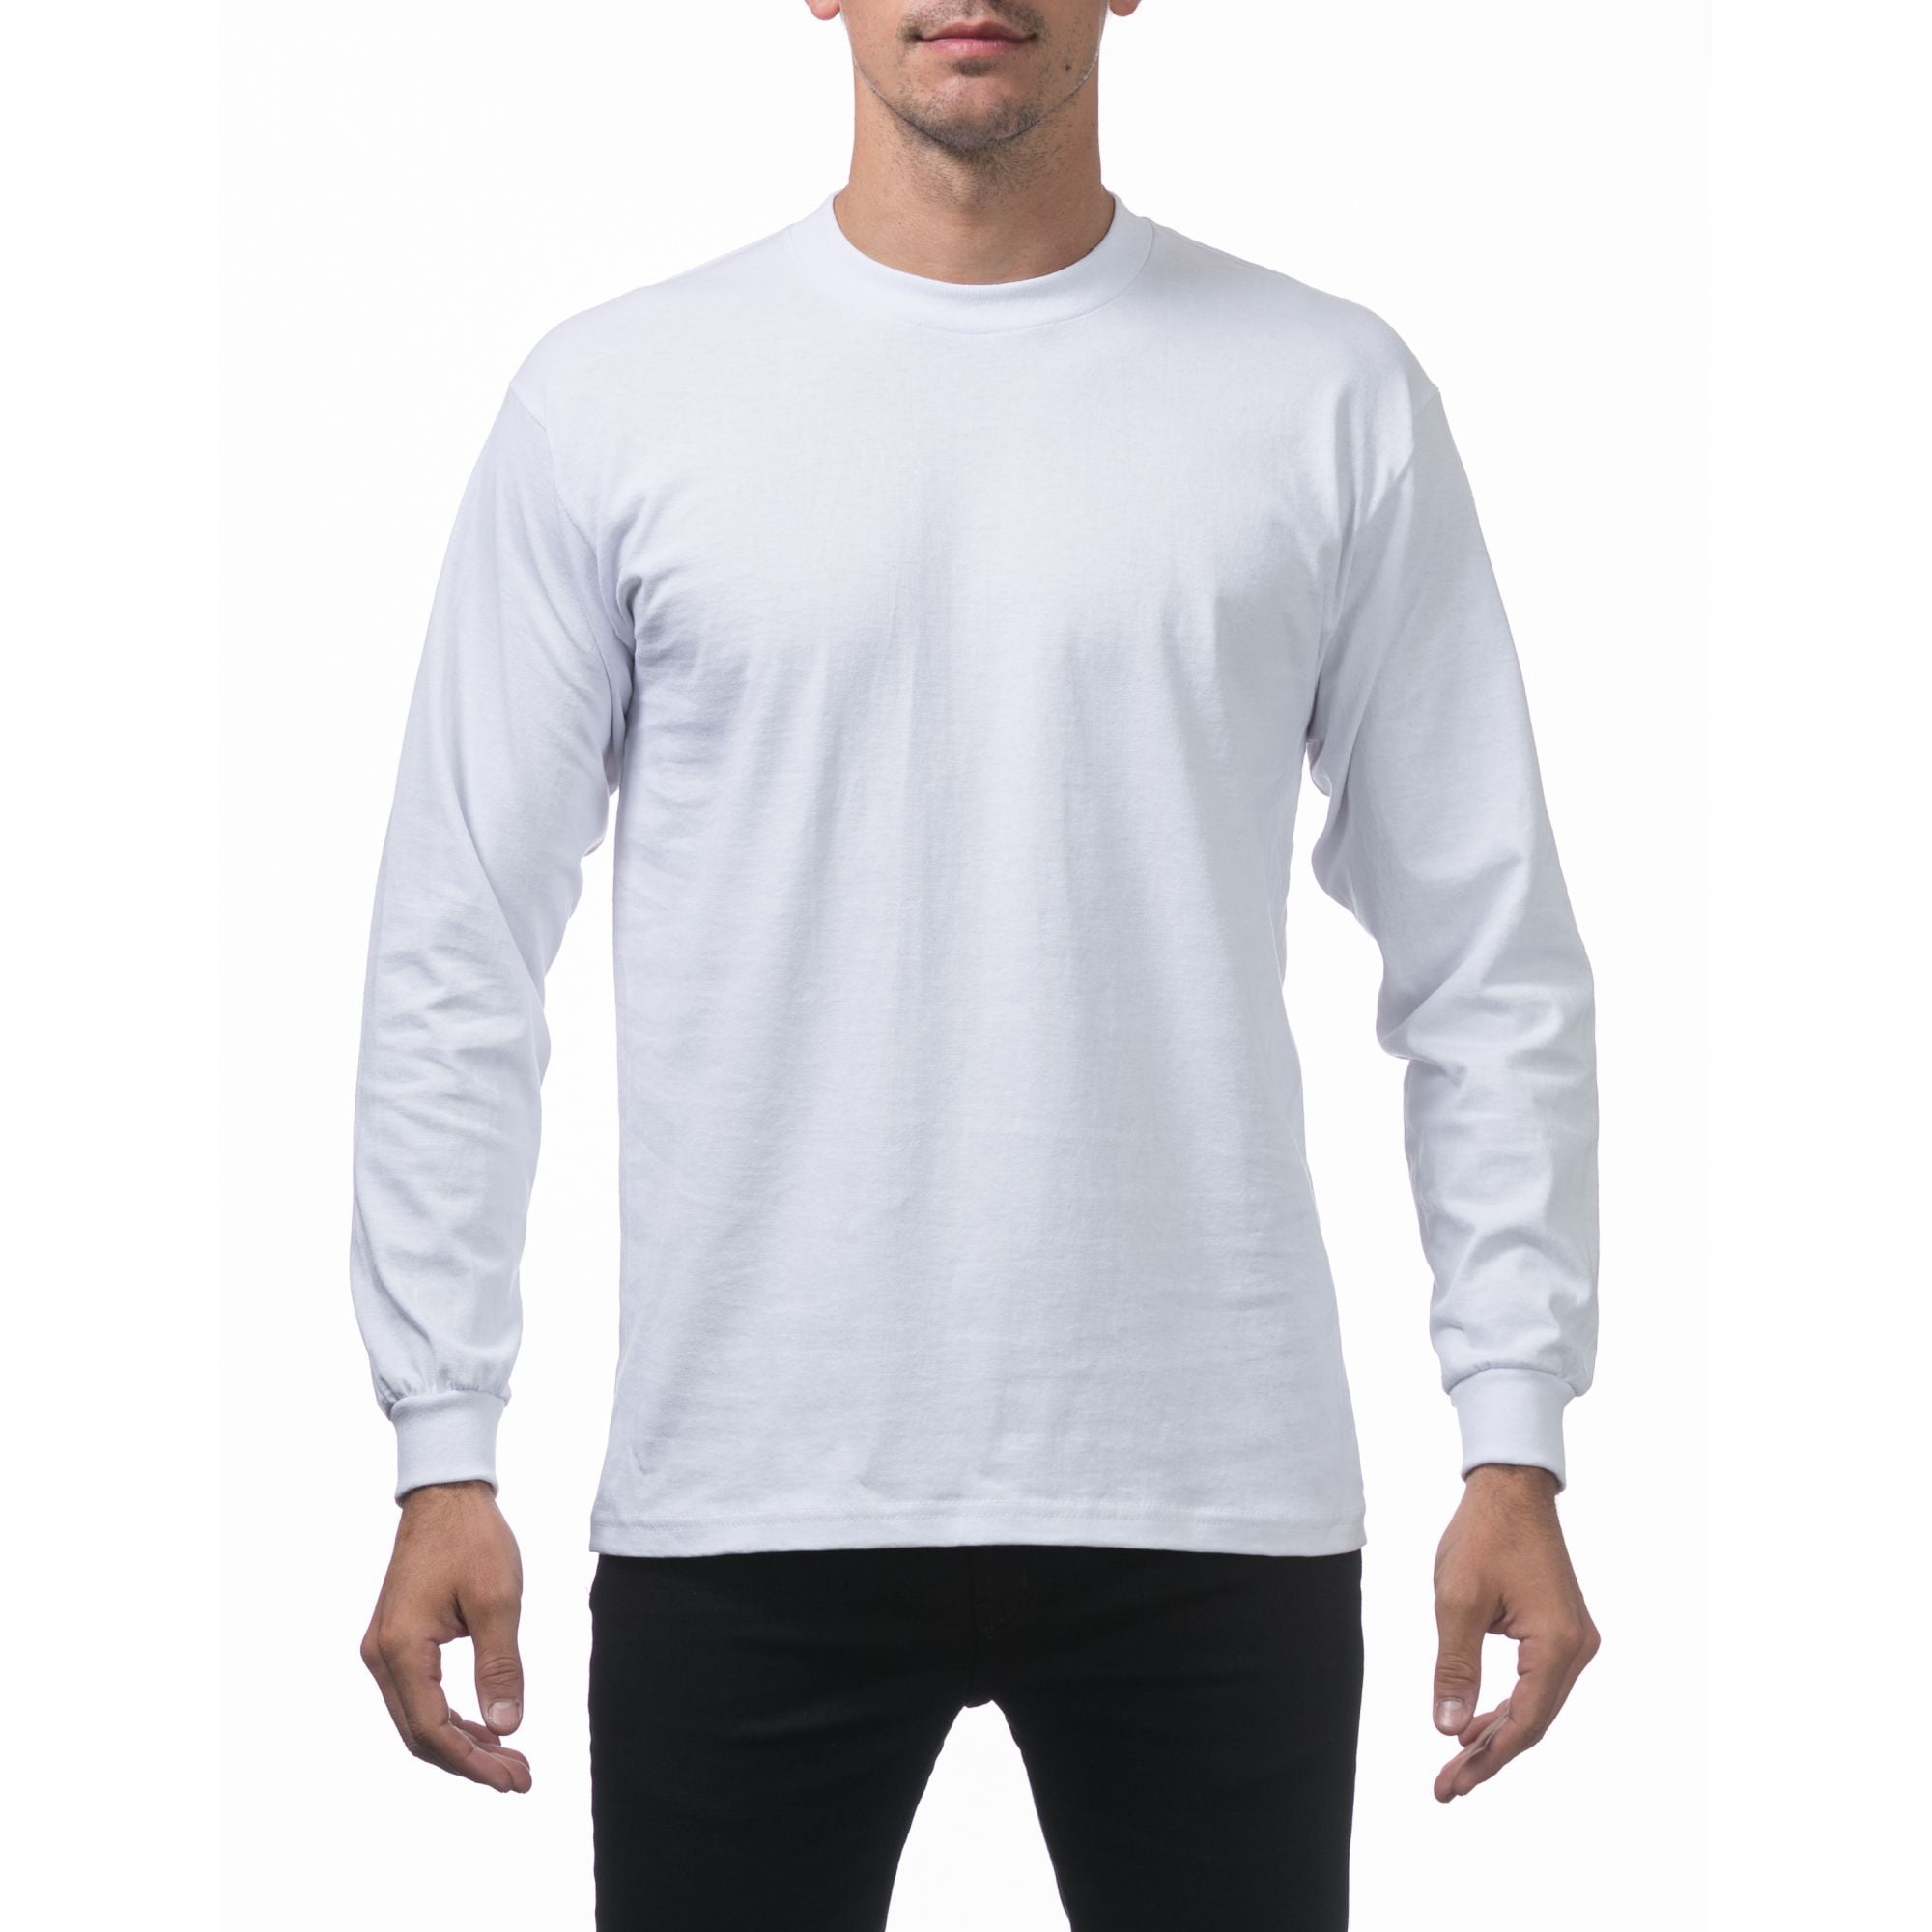 Pro Club Boys Youth Cotton Long Sleeve Crewneck Thermal Top